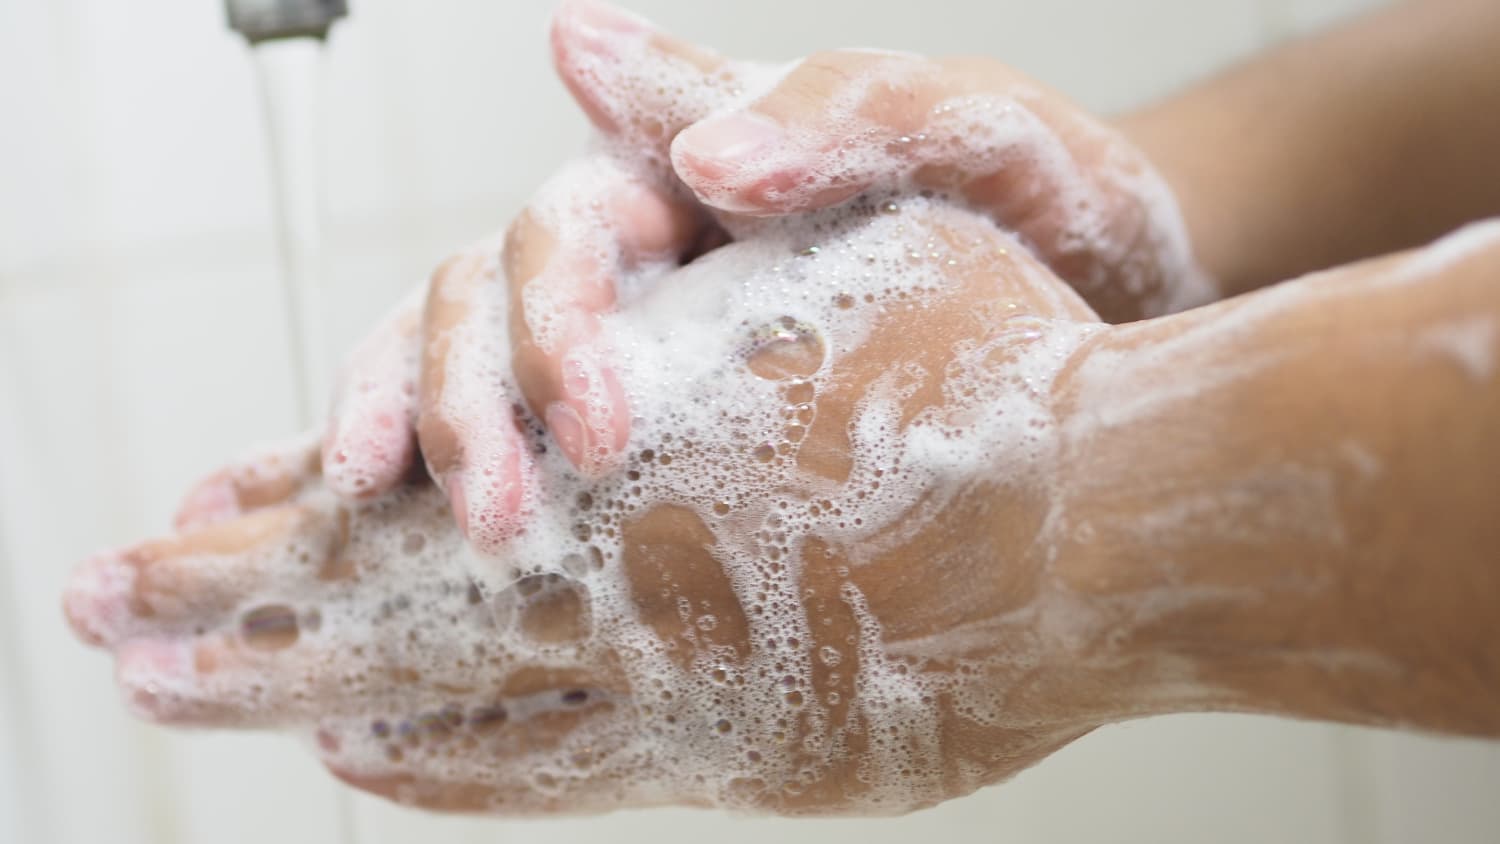 washing hands to prevent spread of COVID-19